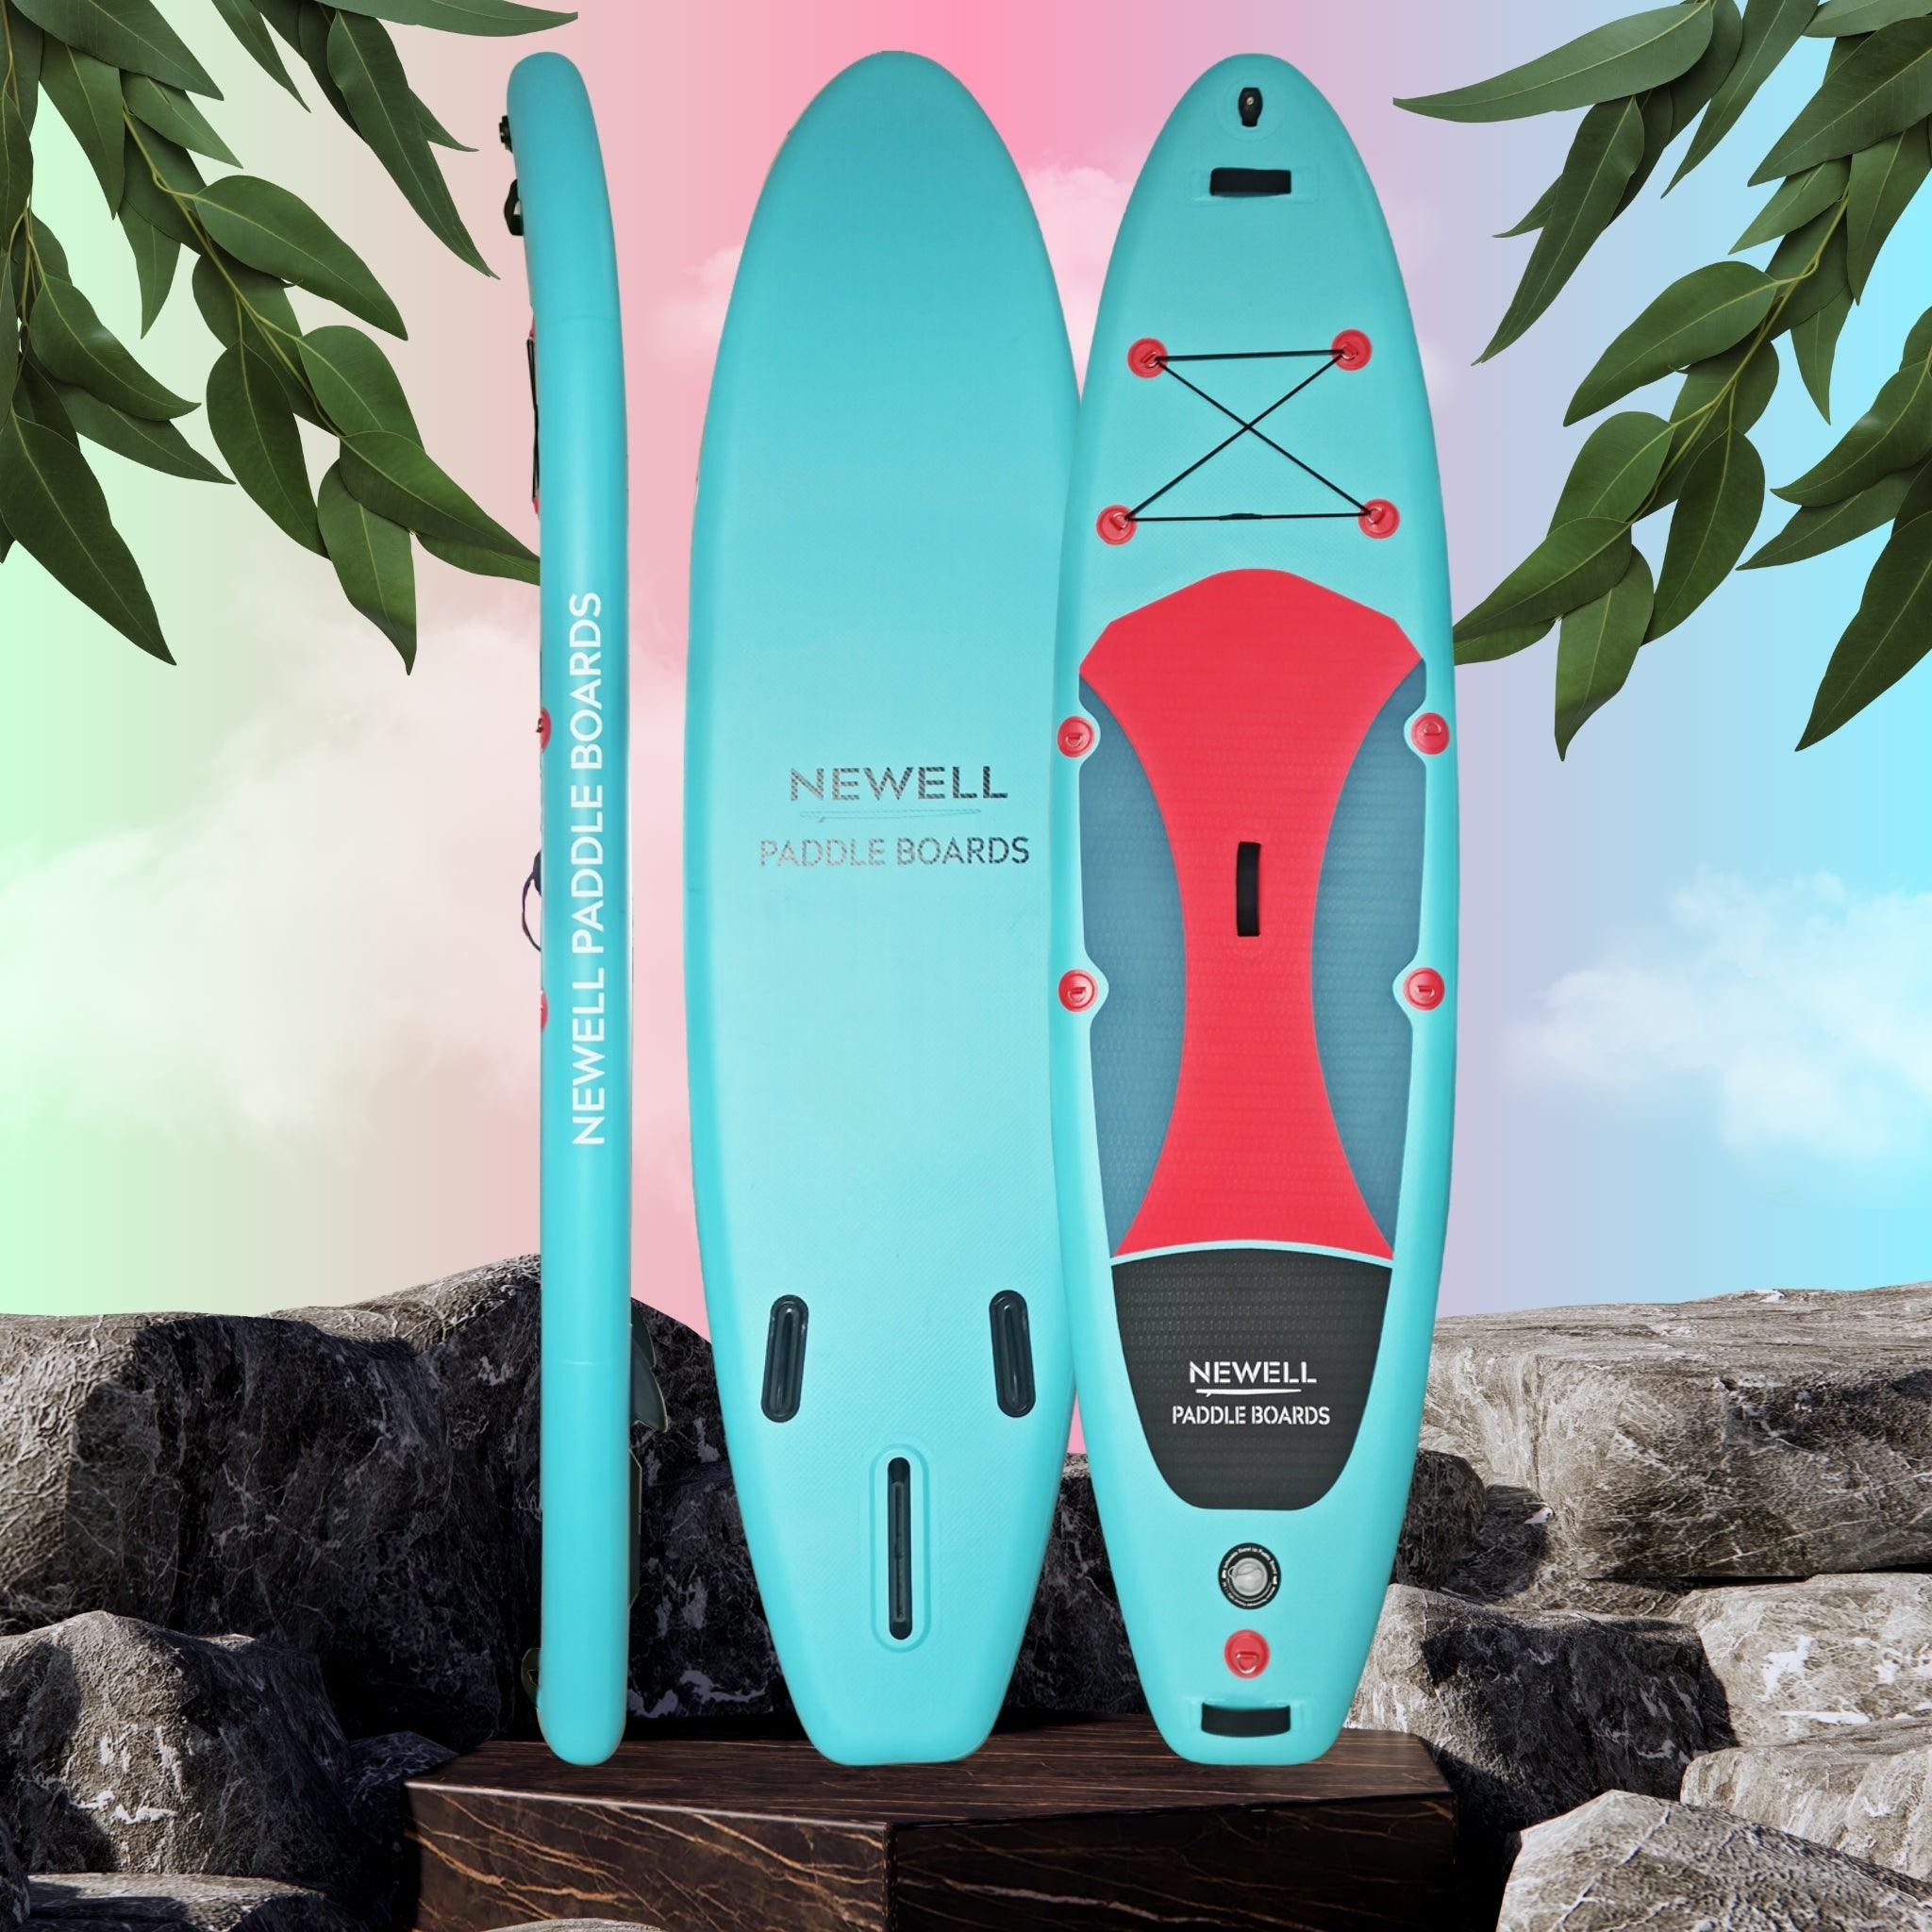 The Calypso paddleboard against a colorful background.